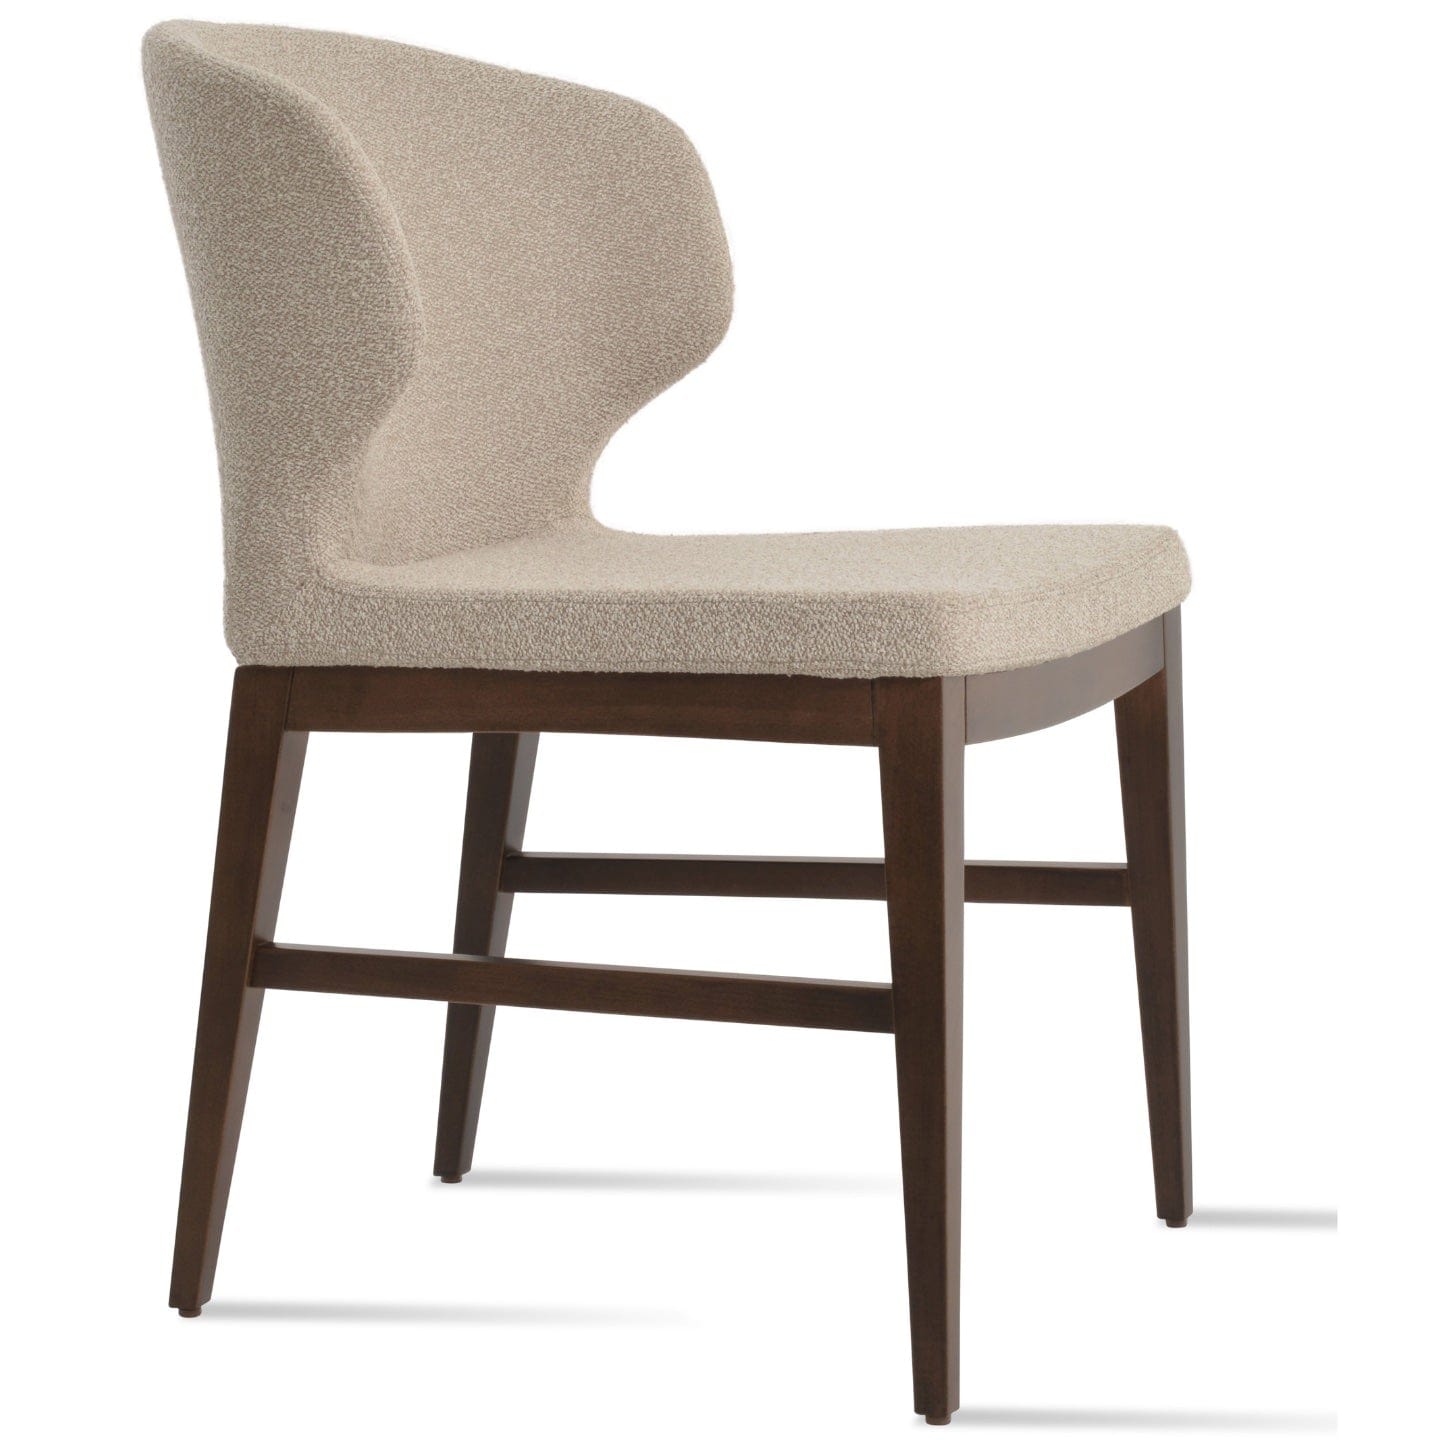 sohoConcept Kitchen & Dining Room Chairs Amed PLUS Stretcher Wood Chairs | Boucle Upholstered Commercial Dining Chairs